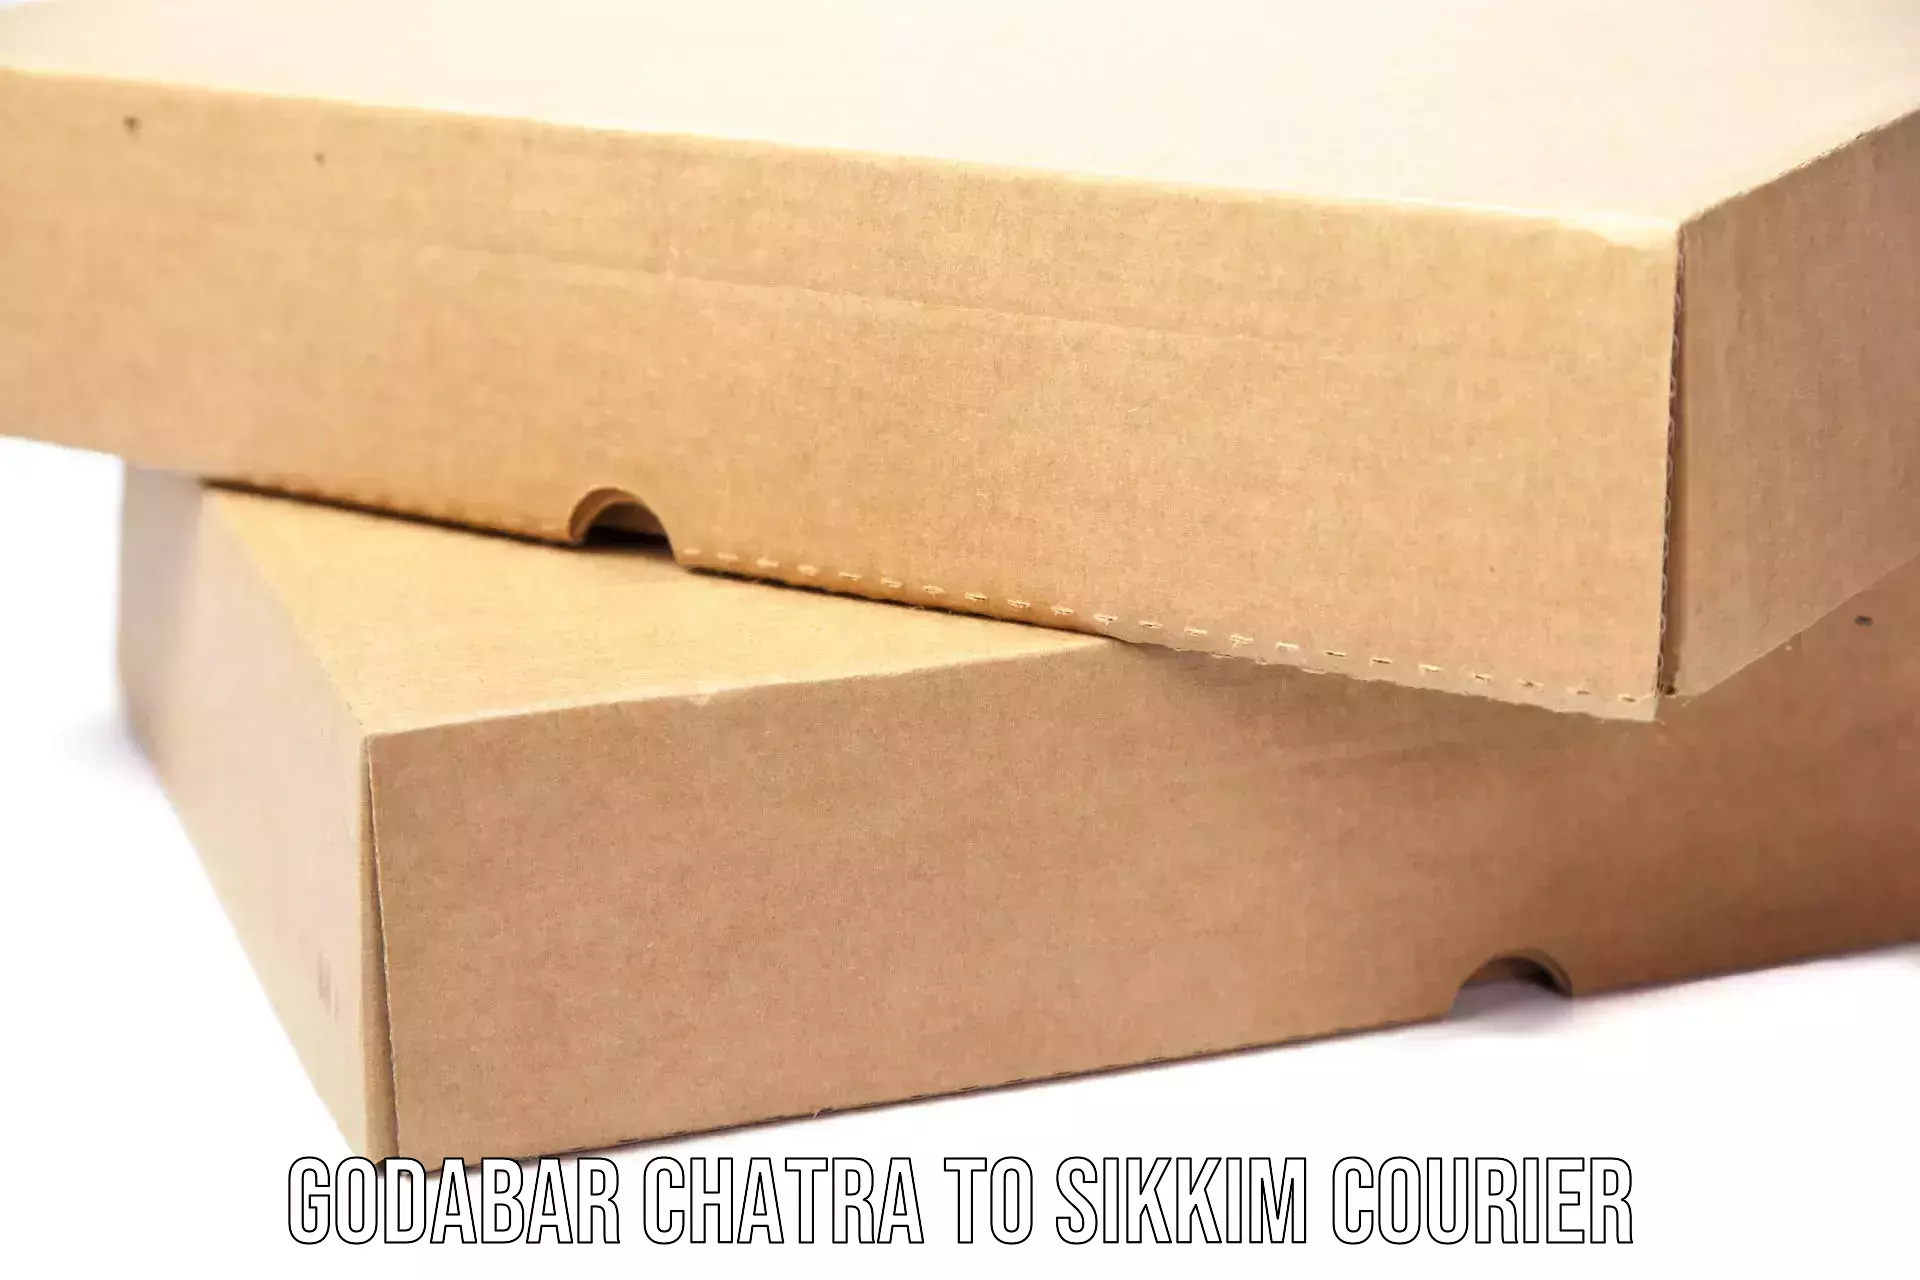 Trackable shipping service Godabar Chatra to Sikkim